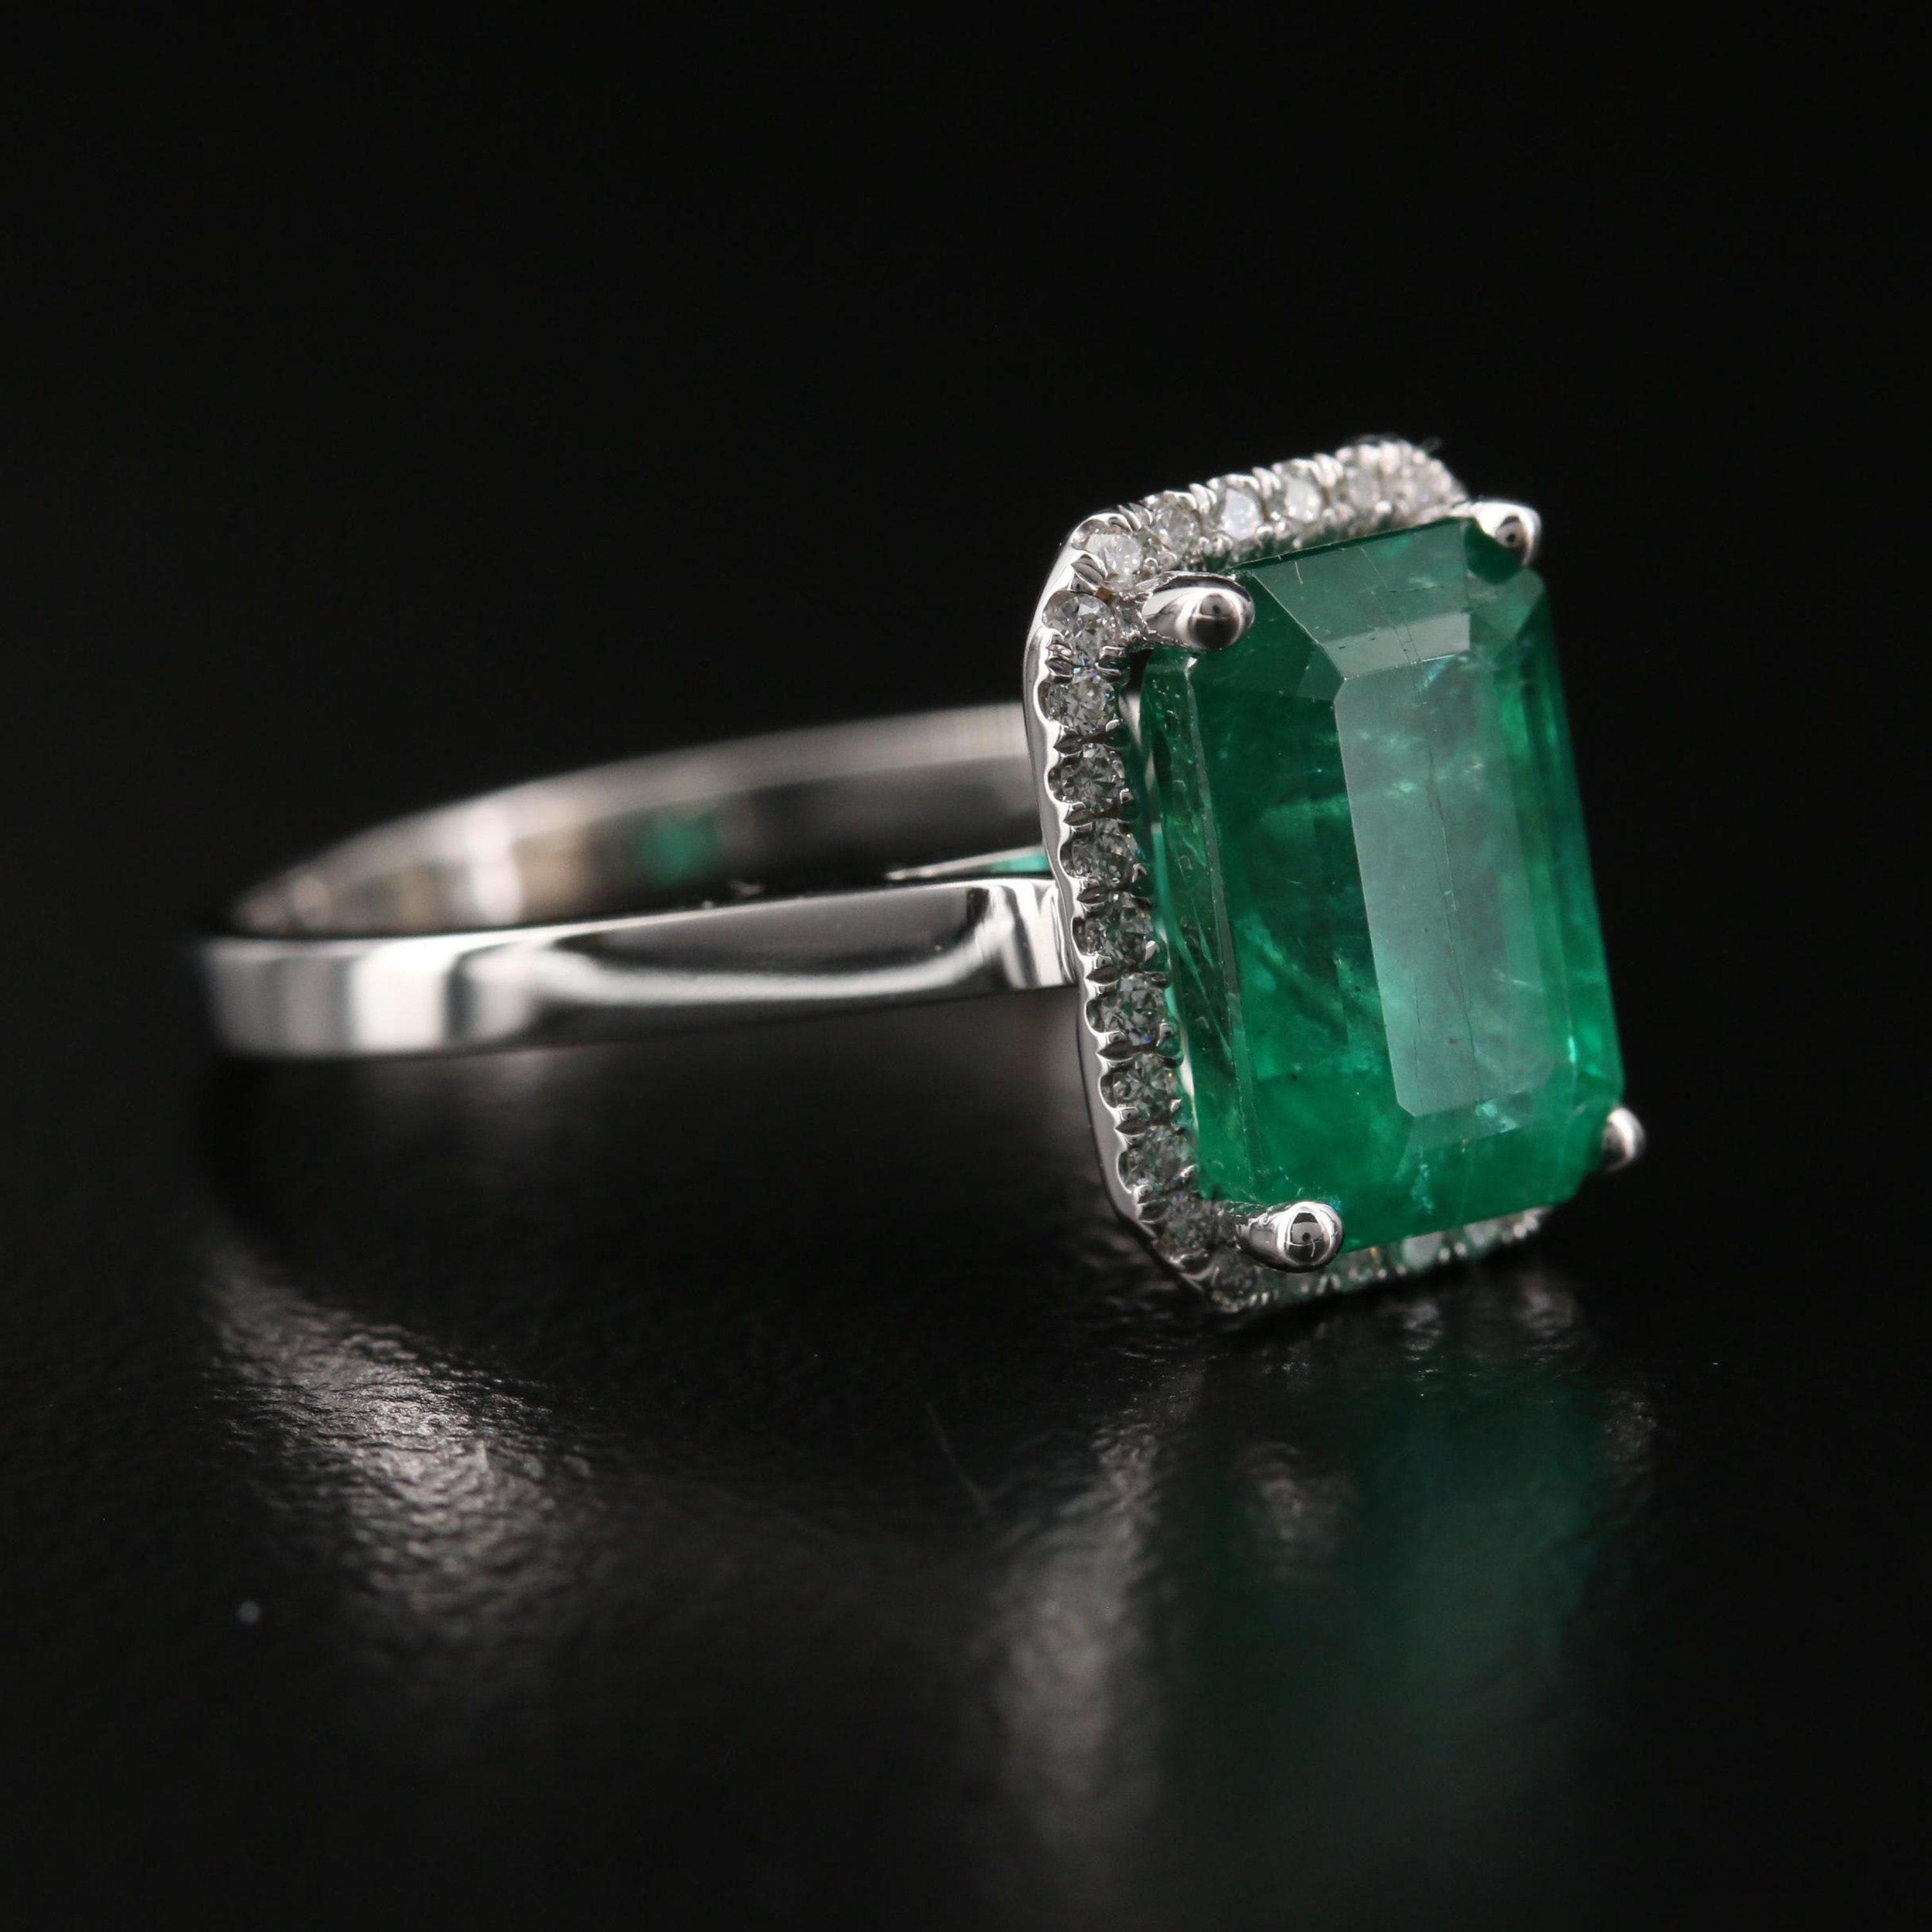 For Sale:  2.8 Carat Halo Emerald Engagement Ring, Emerald Wedding Ring Cocktail Ring 5